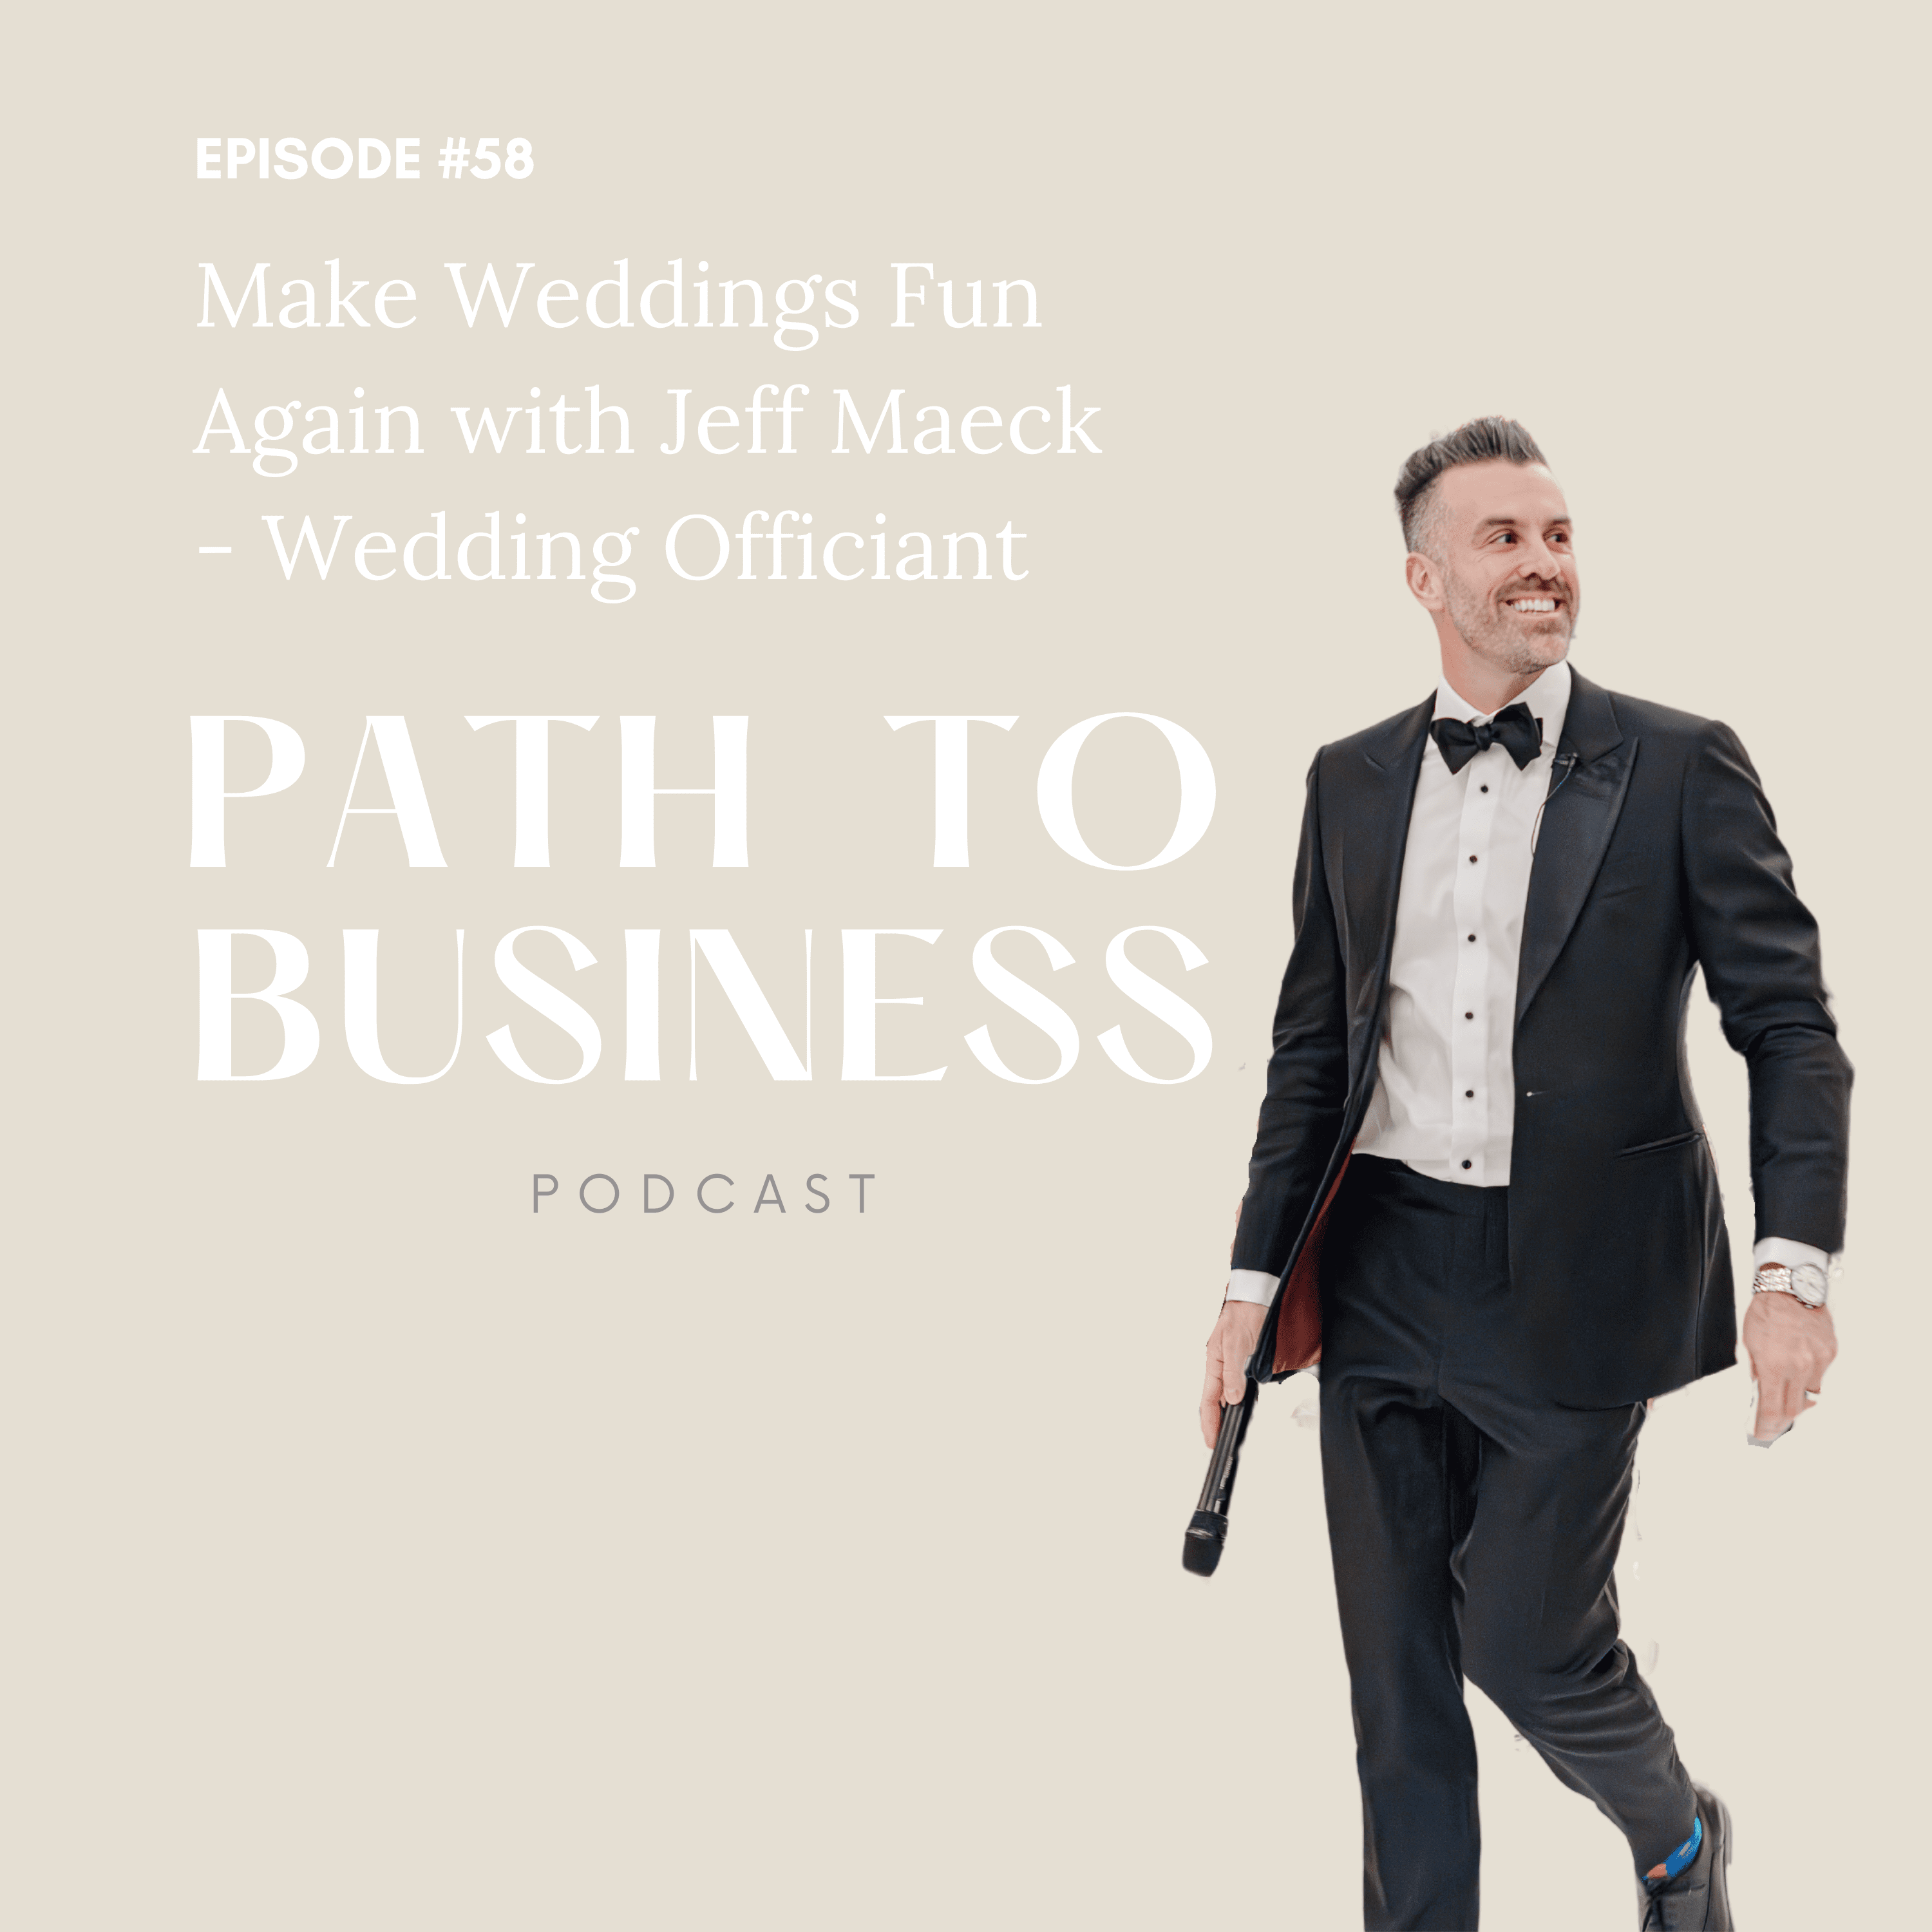 jeff maeck wedding officiant - DTK Chapel - Path to Business Podcast